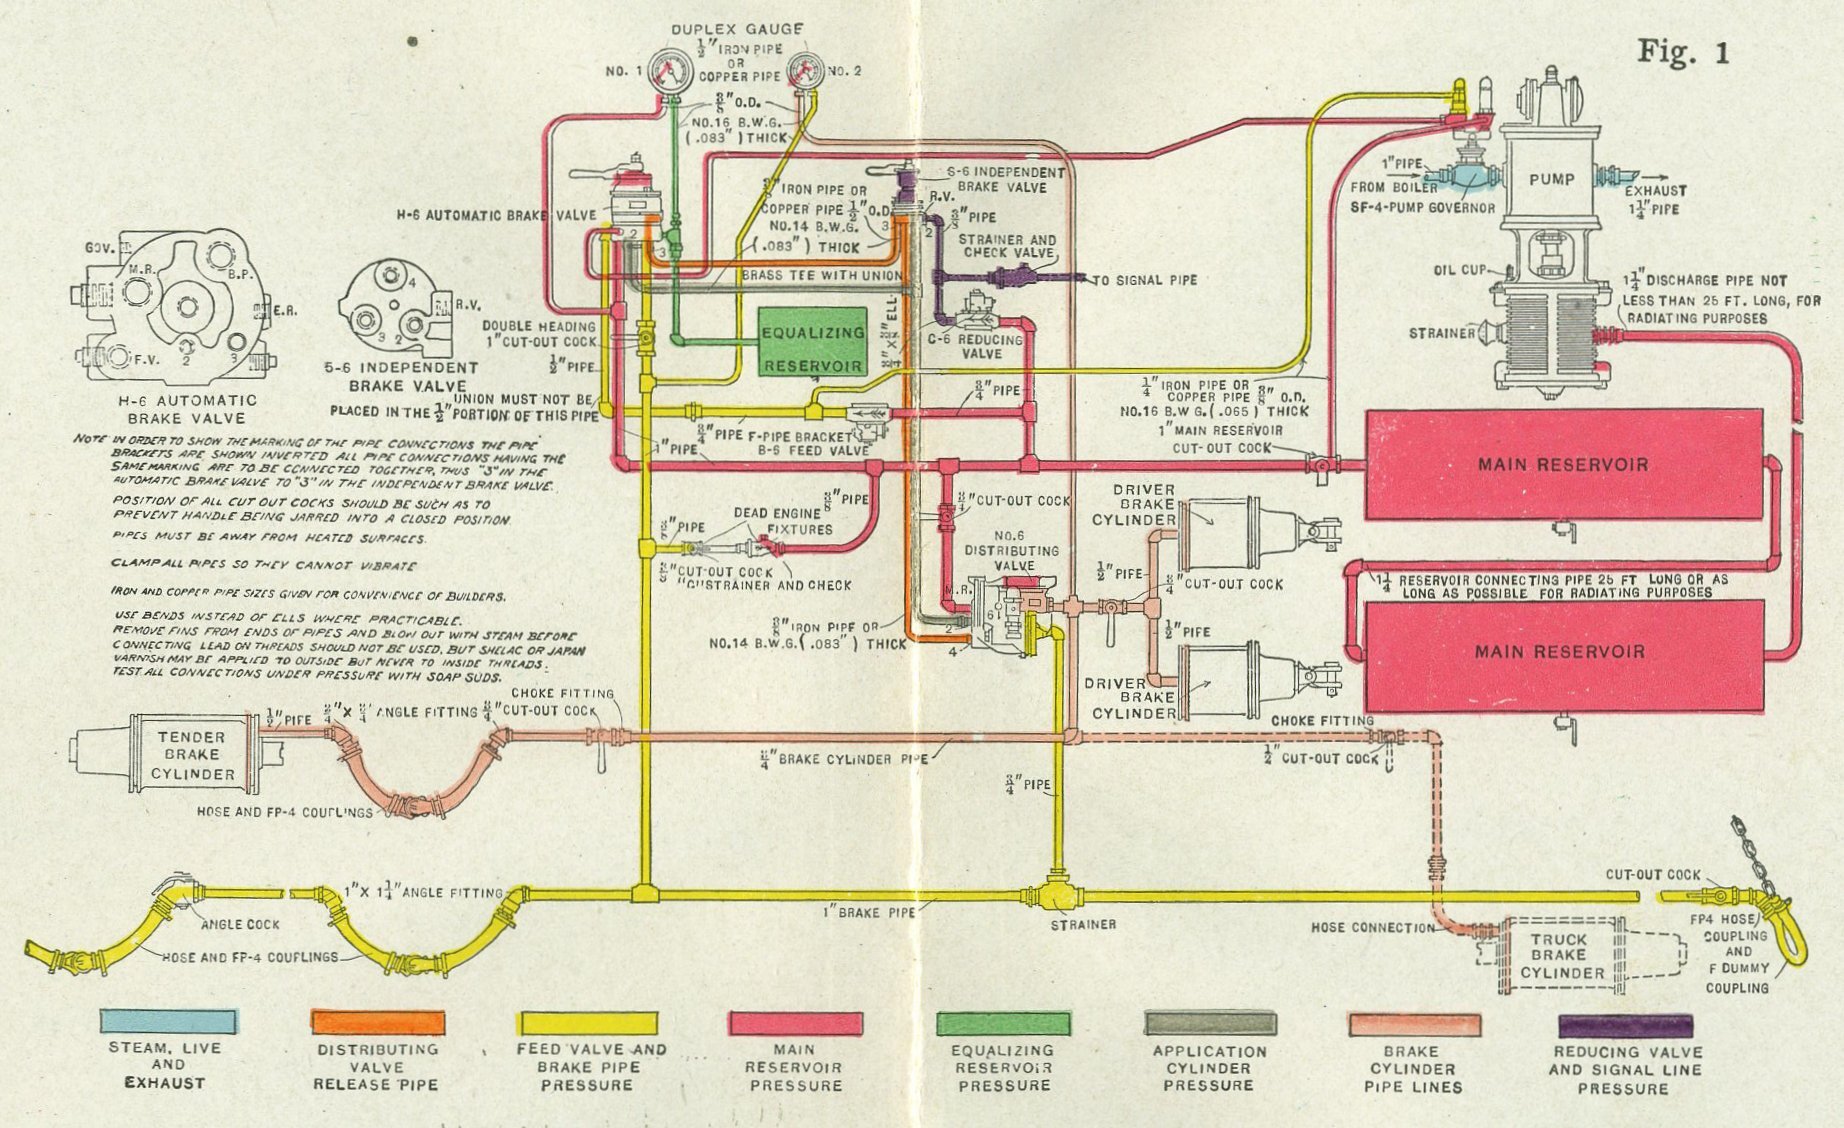 Figure 1: Piping diagram from 1909 of a Westinghouse 6-ET Air Brake system on a locomotive [1].